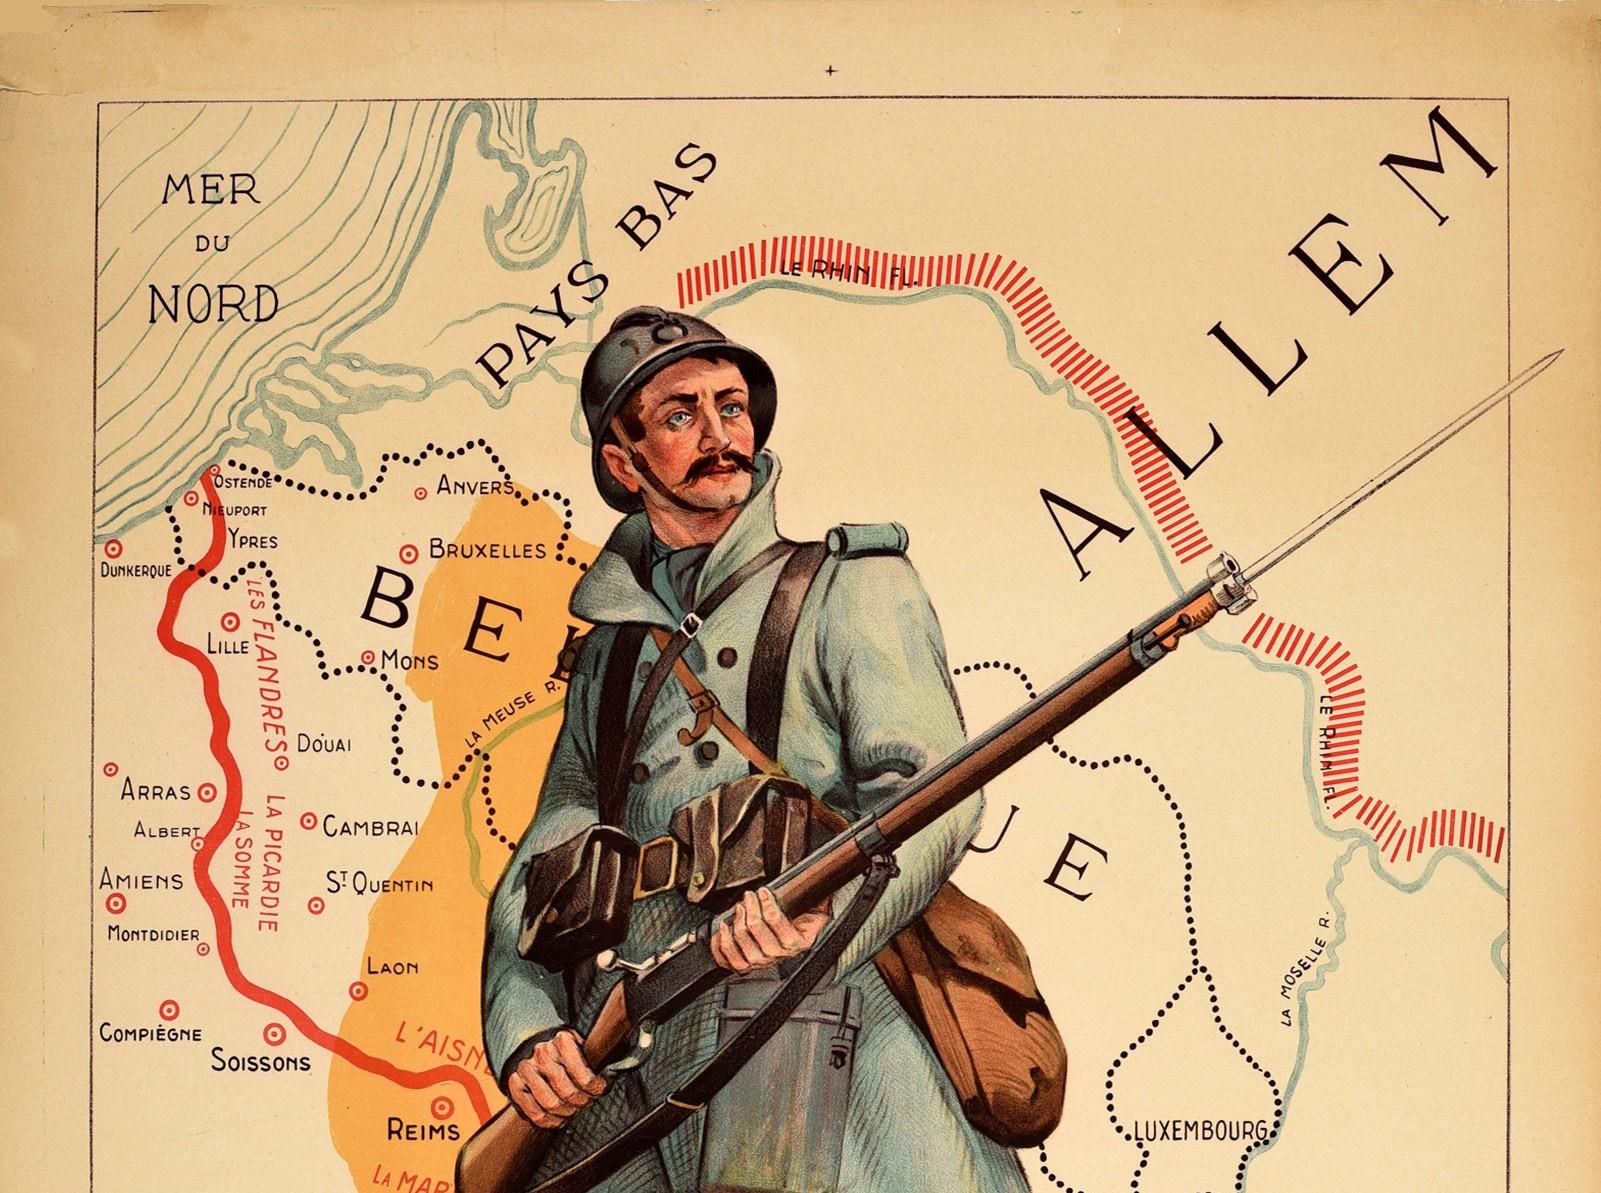 Original antique World War One poster - French Infantry In Battle / L'Infanterie Francais Dans La Bataille - featuring an image of a French soldier in uniform wearing a winter coat and helmet and holding a bayonet rifle gun in front of a map of